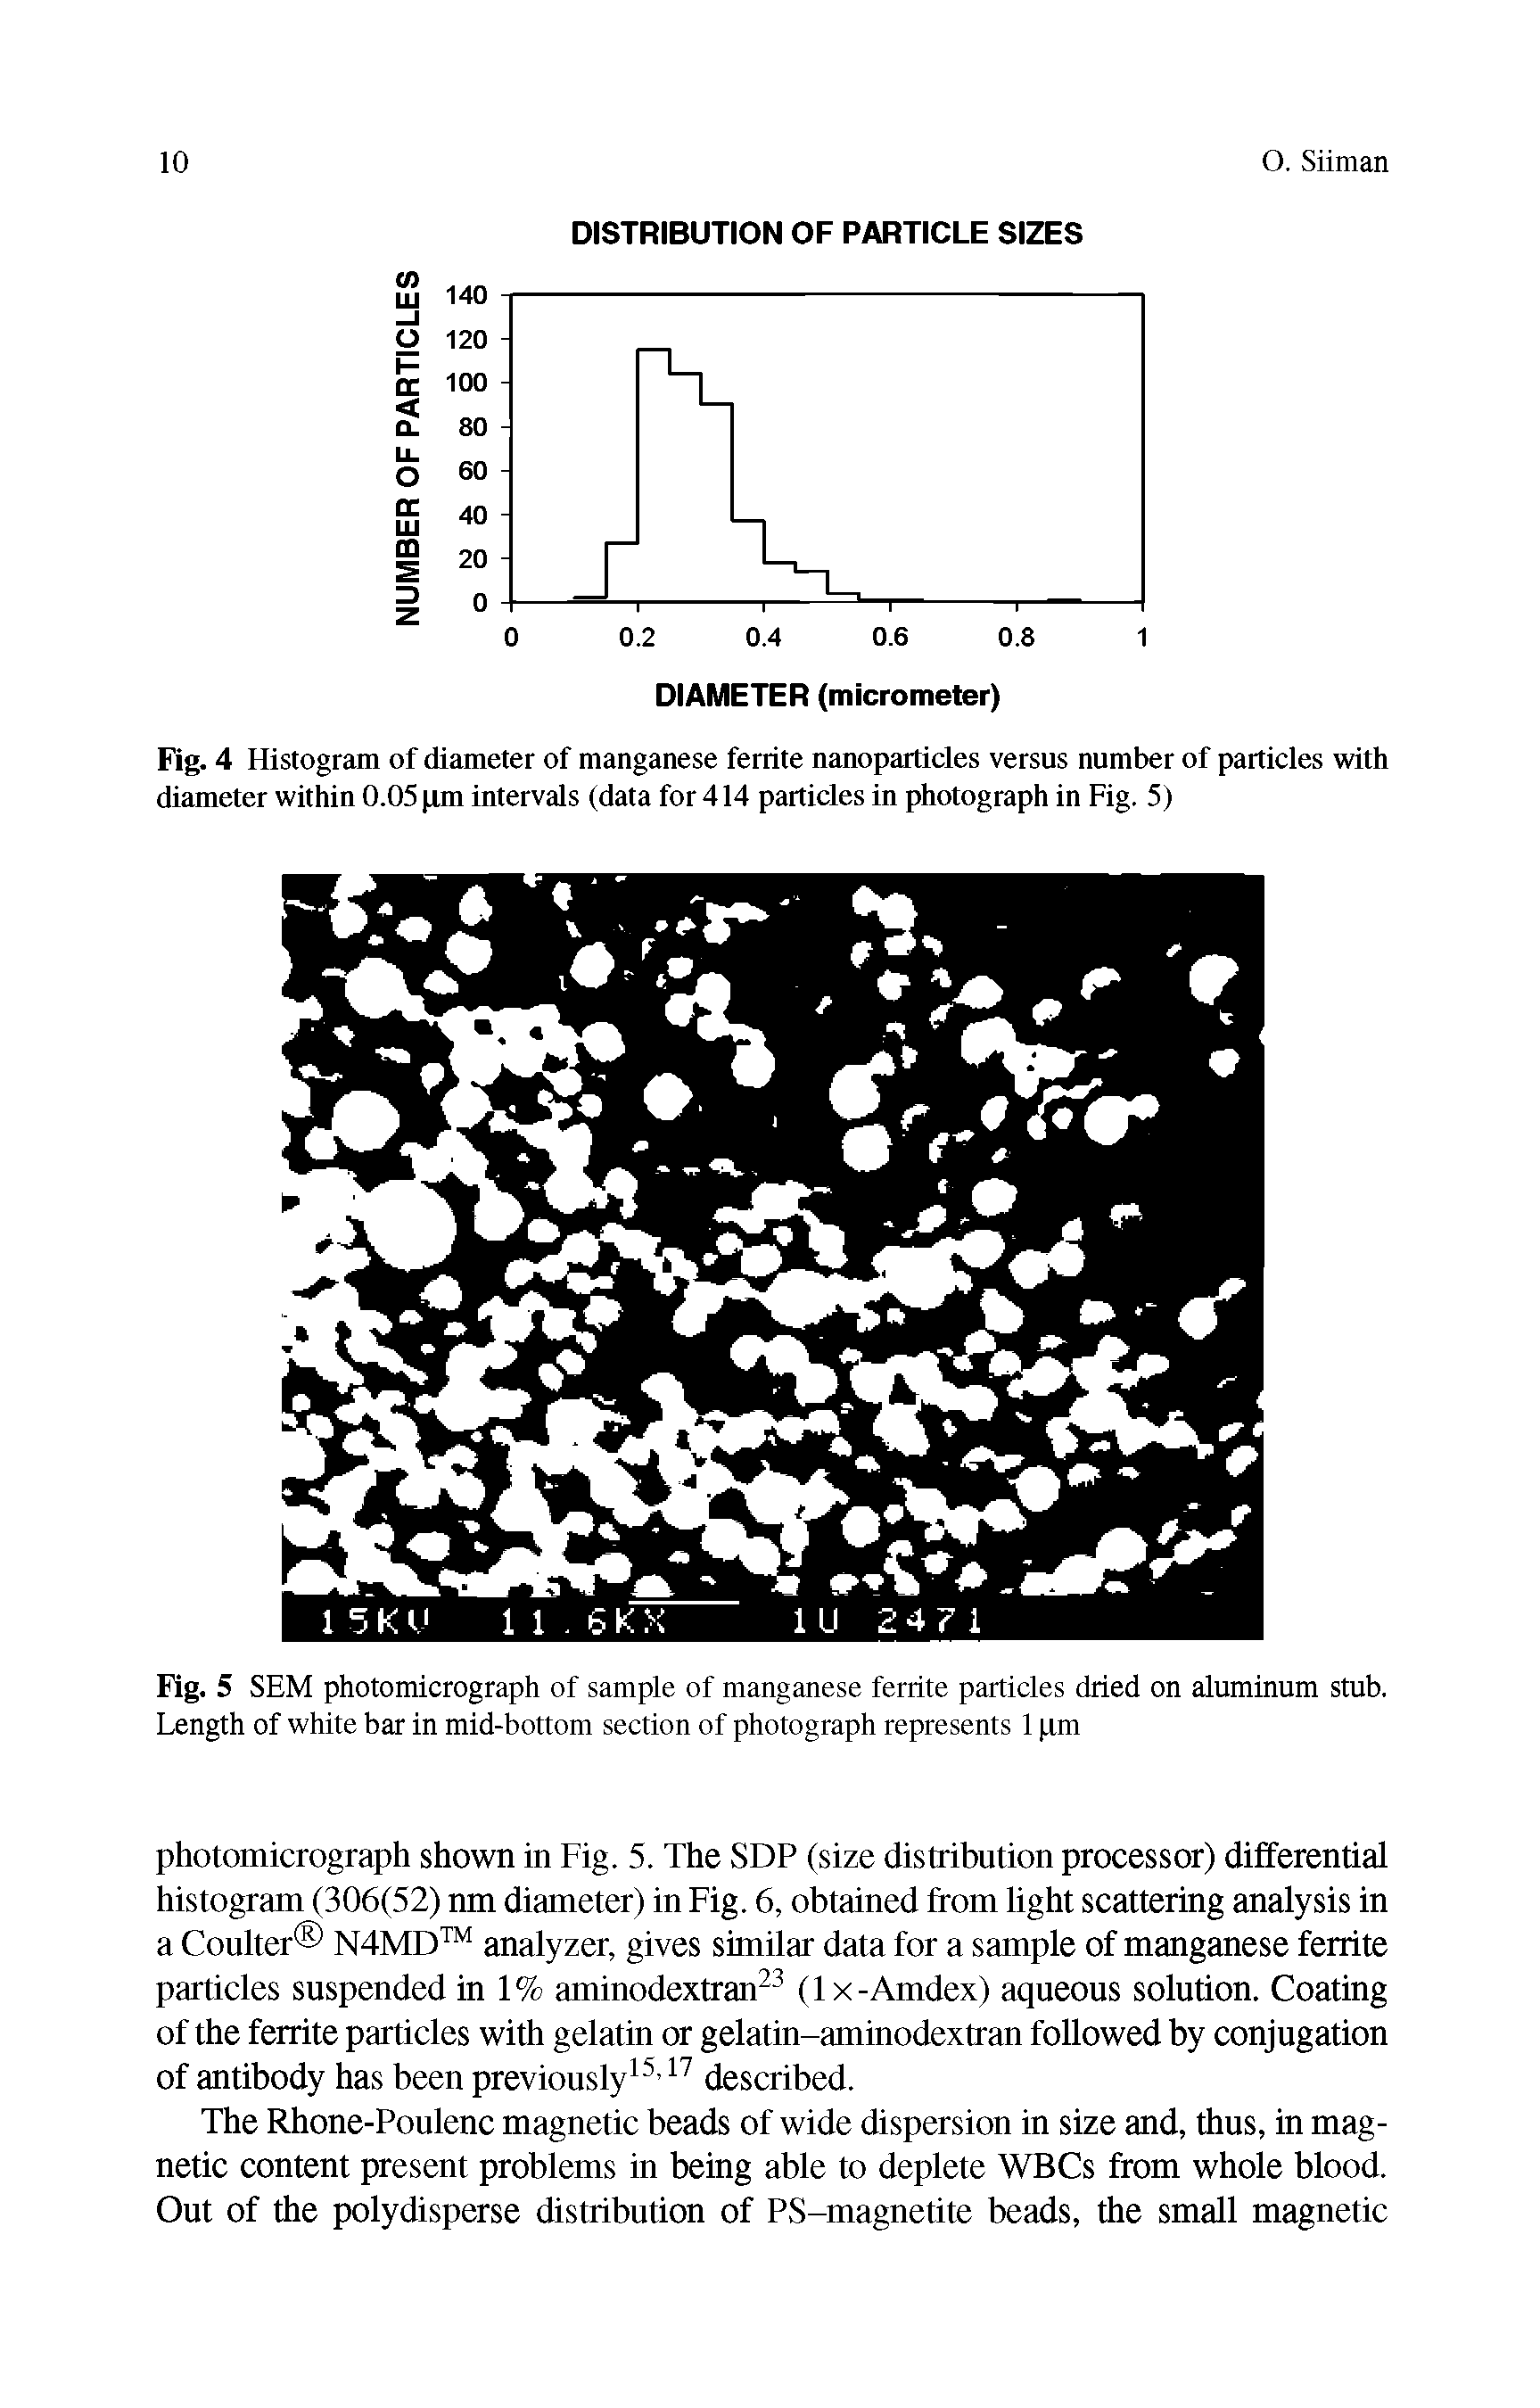 Fig. 4 Histogram of diameter of manganese ferrite nanoparticles versus number of particles with diameter within 0.05 pm intervals (data for 414 particles in photograph in Fig. 5)...